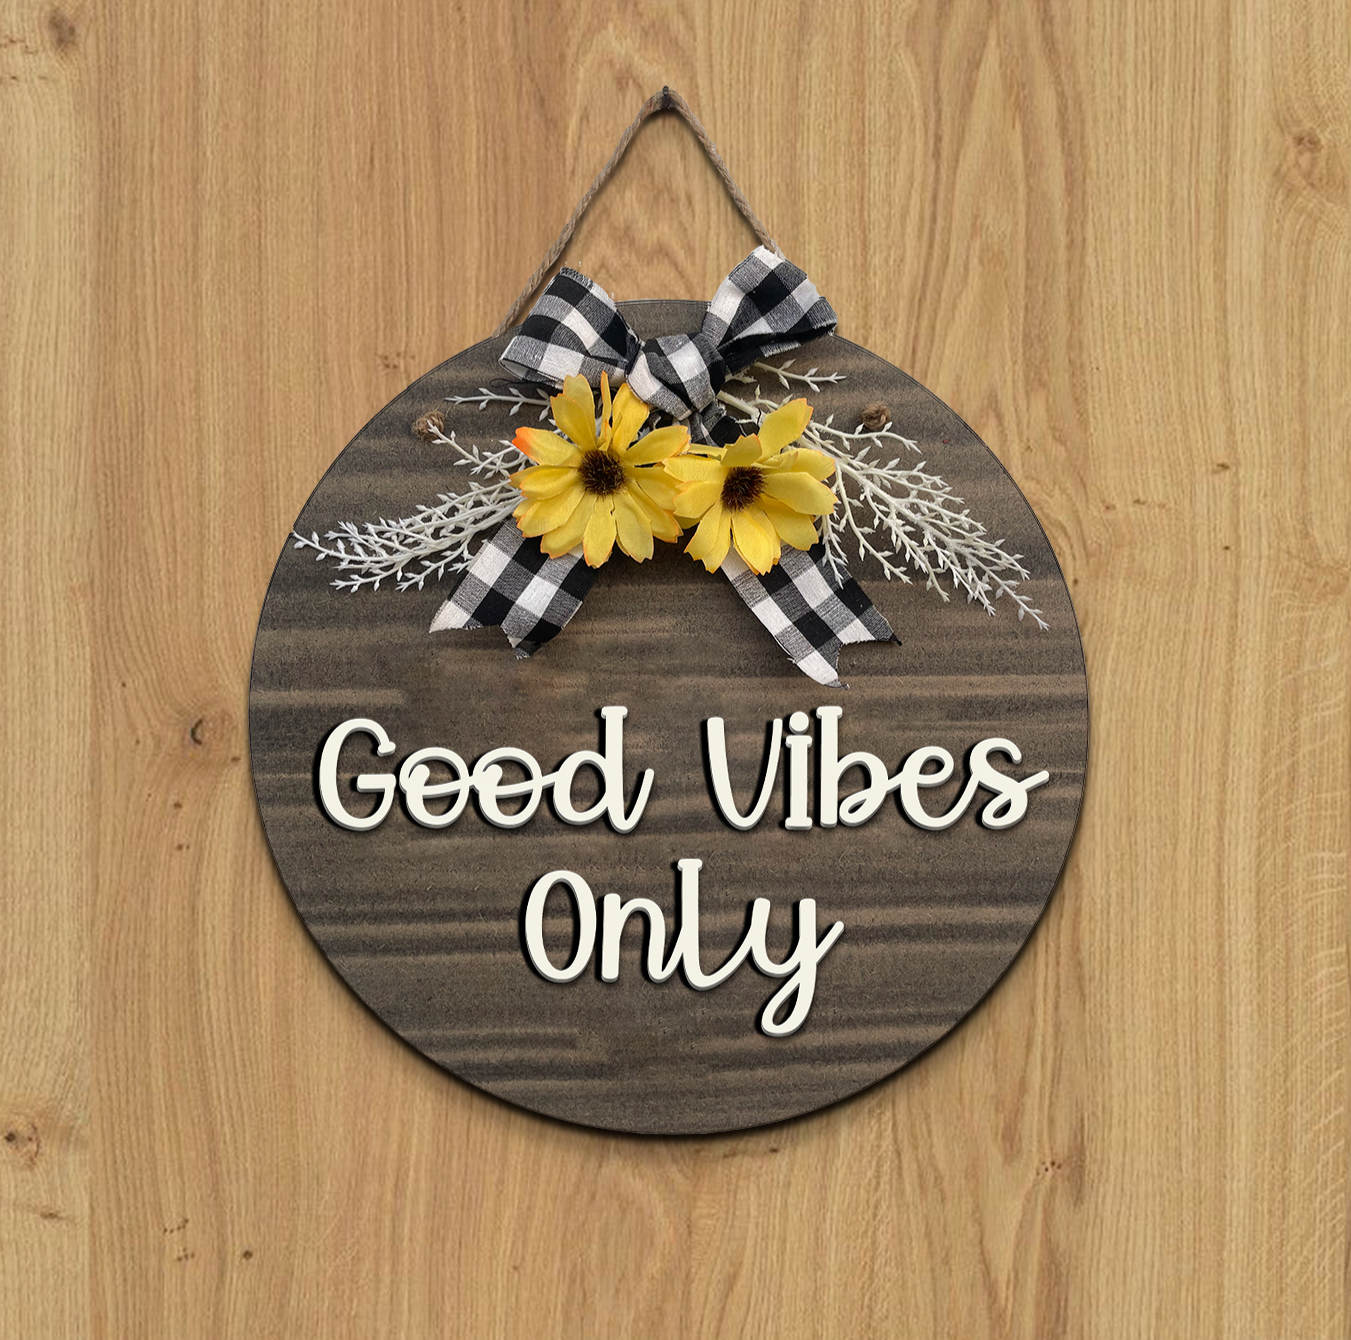 Good Vibes Only Wall Hanging Round Wooden Decorative Frame Board Plaque Art